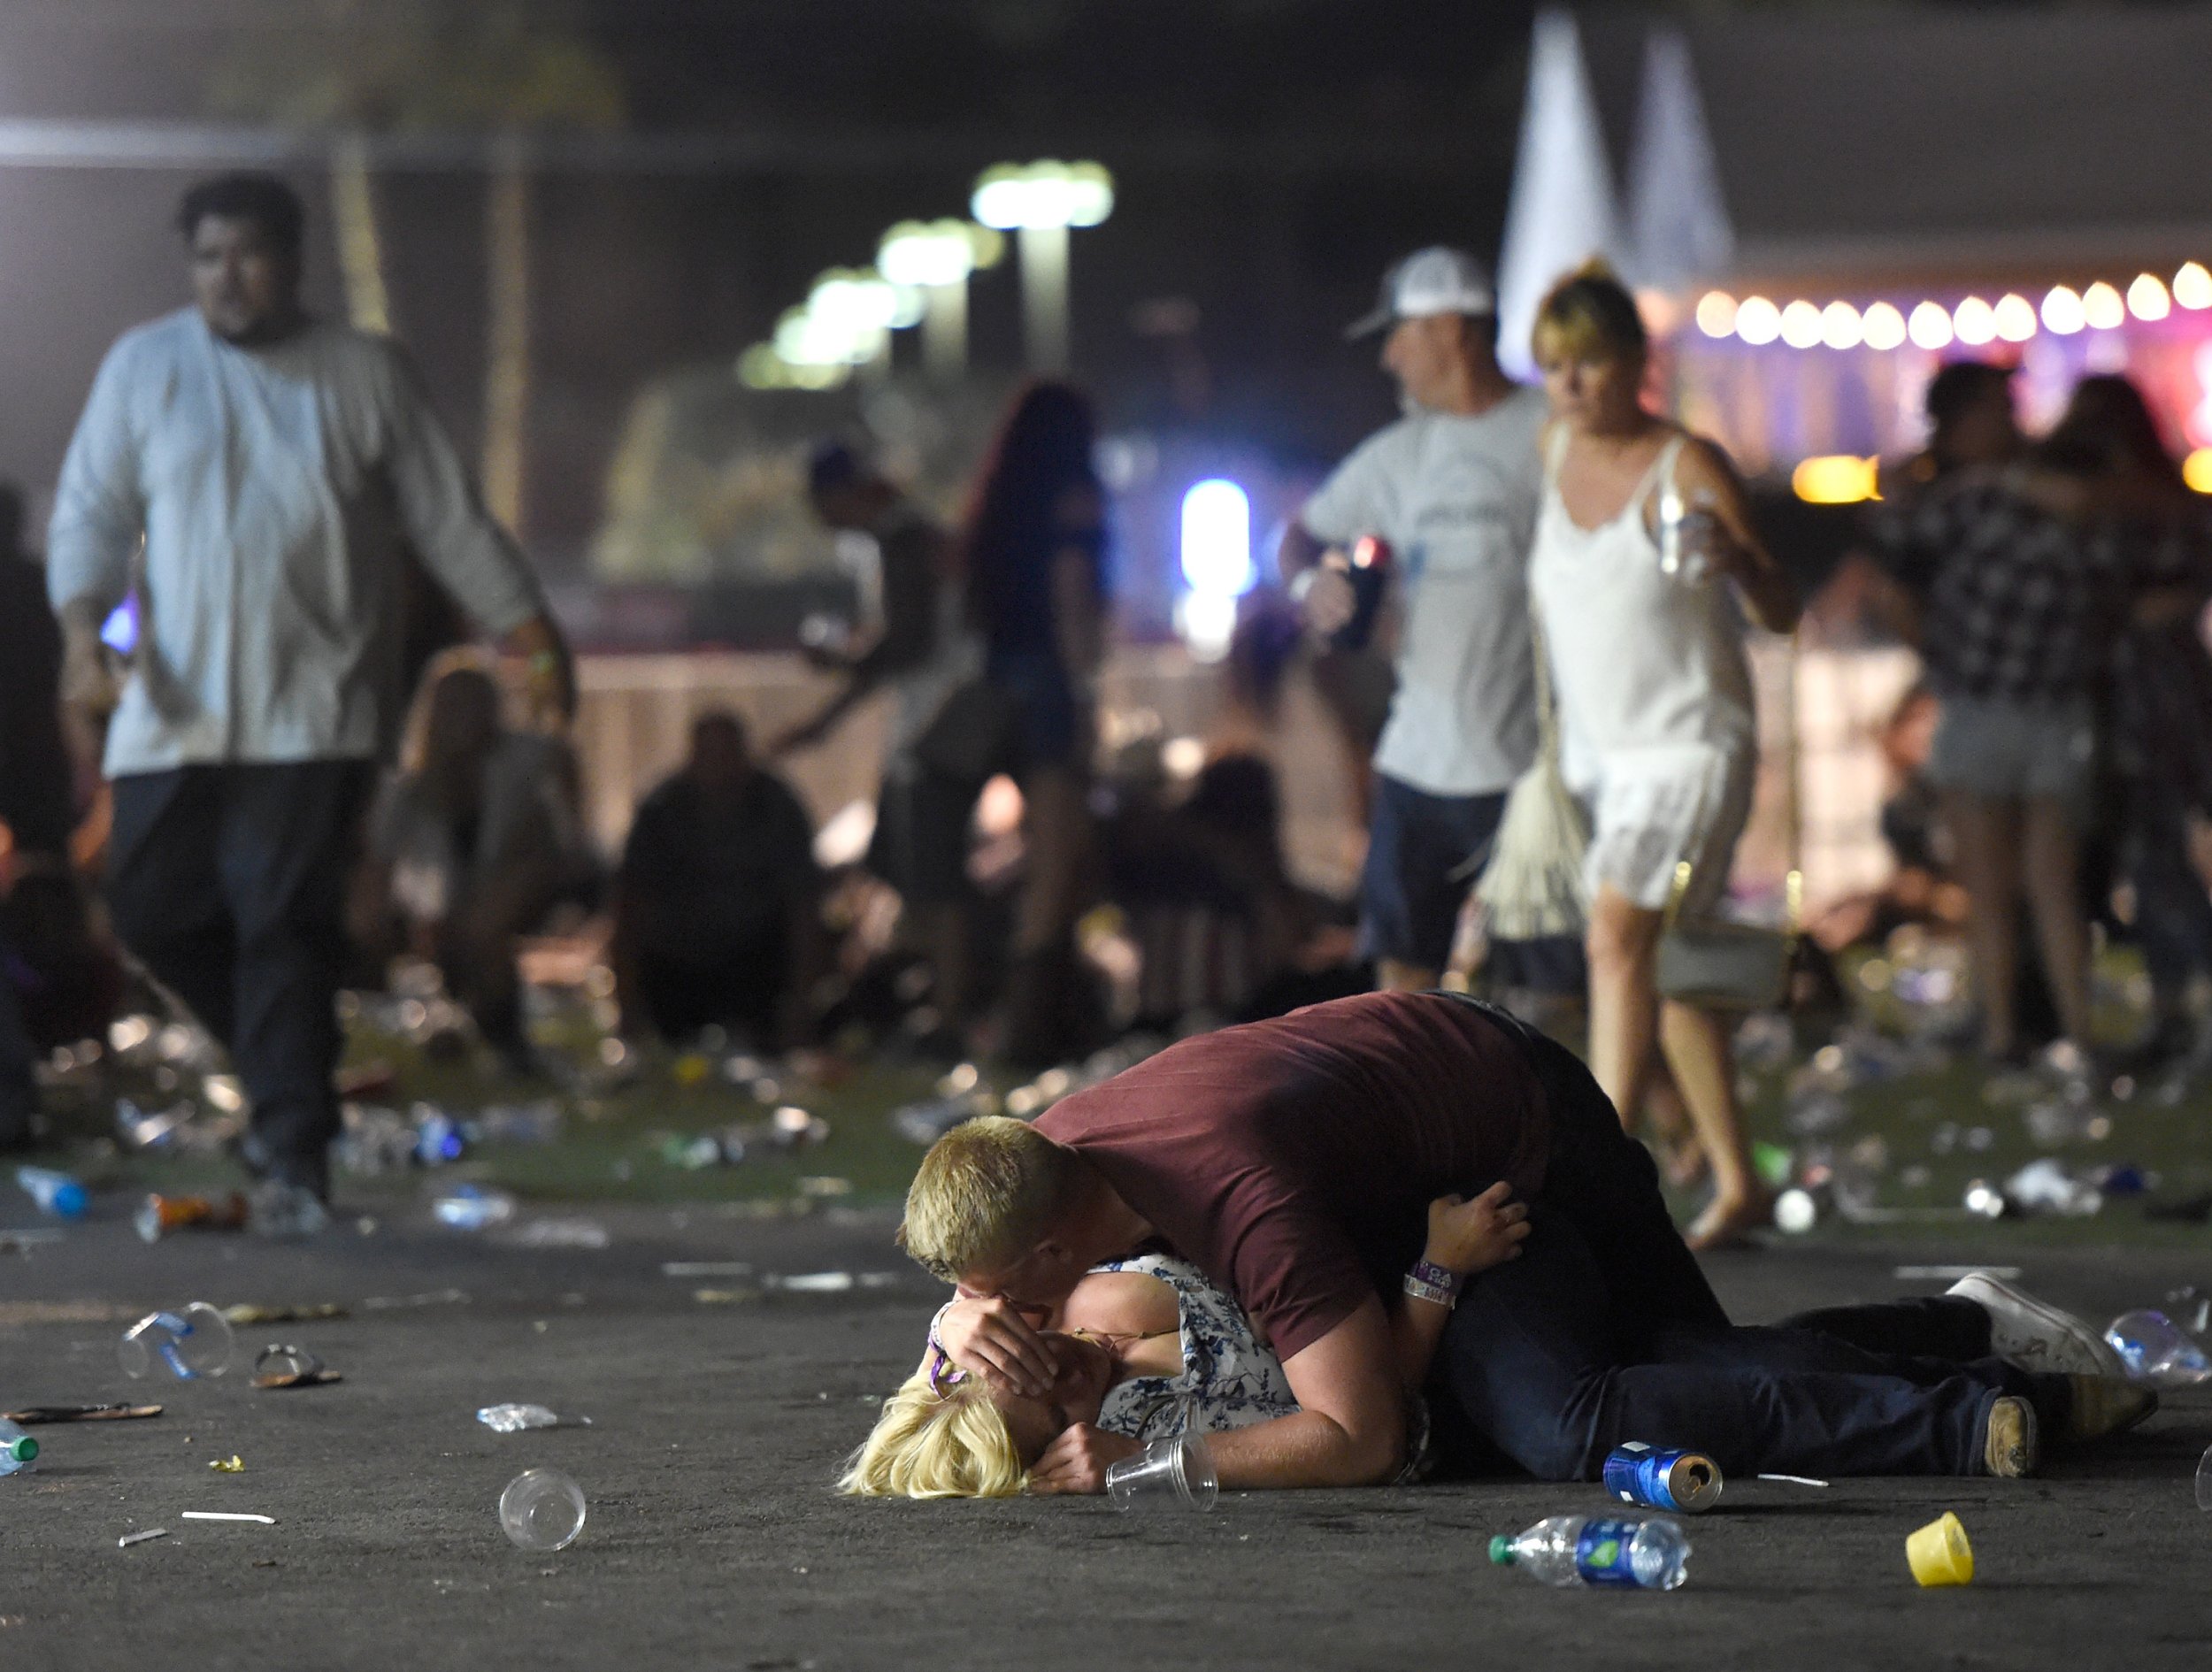 Las Vegas Conspiracy Theory Claims Shooting Victims Are Government Actors